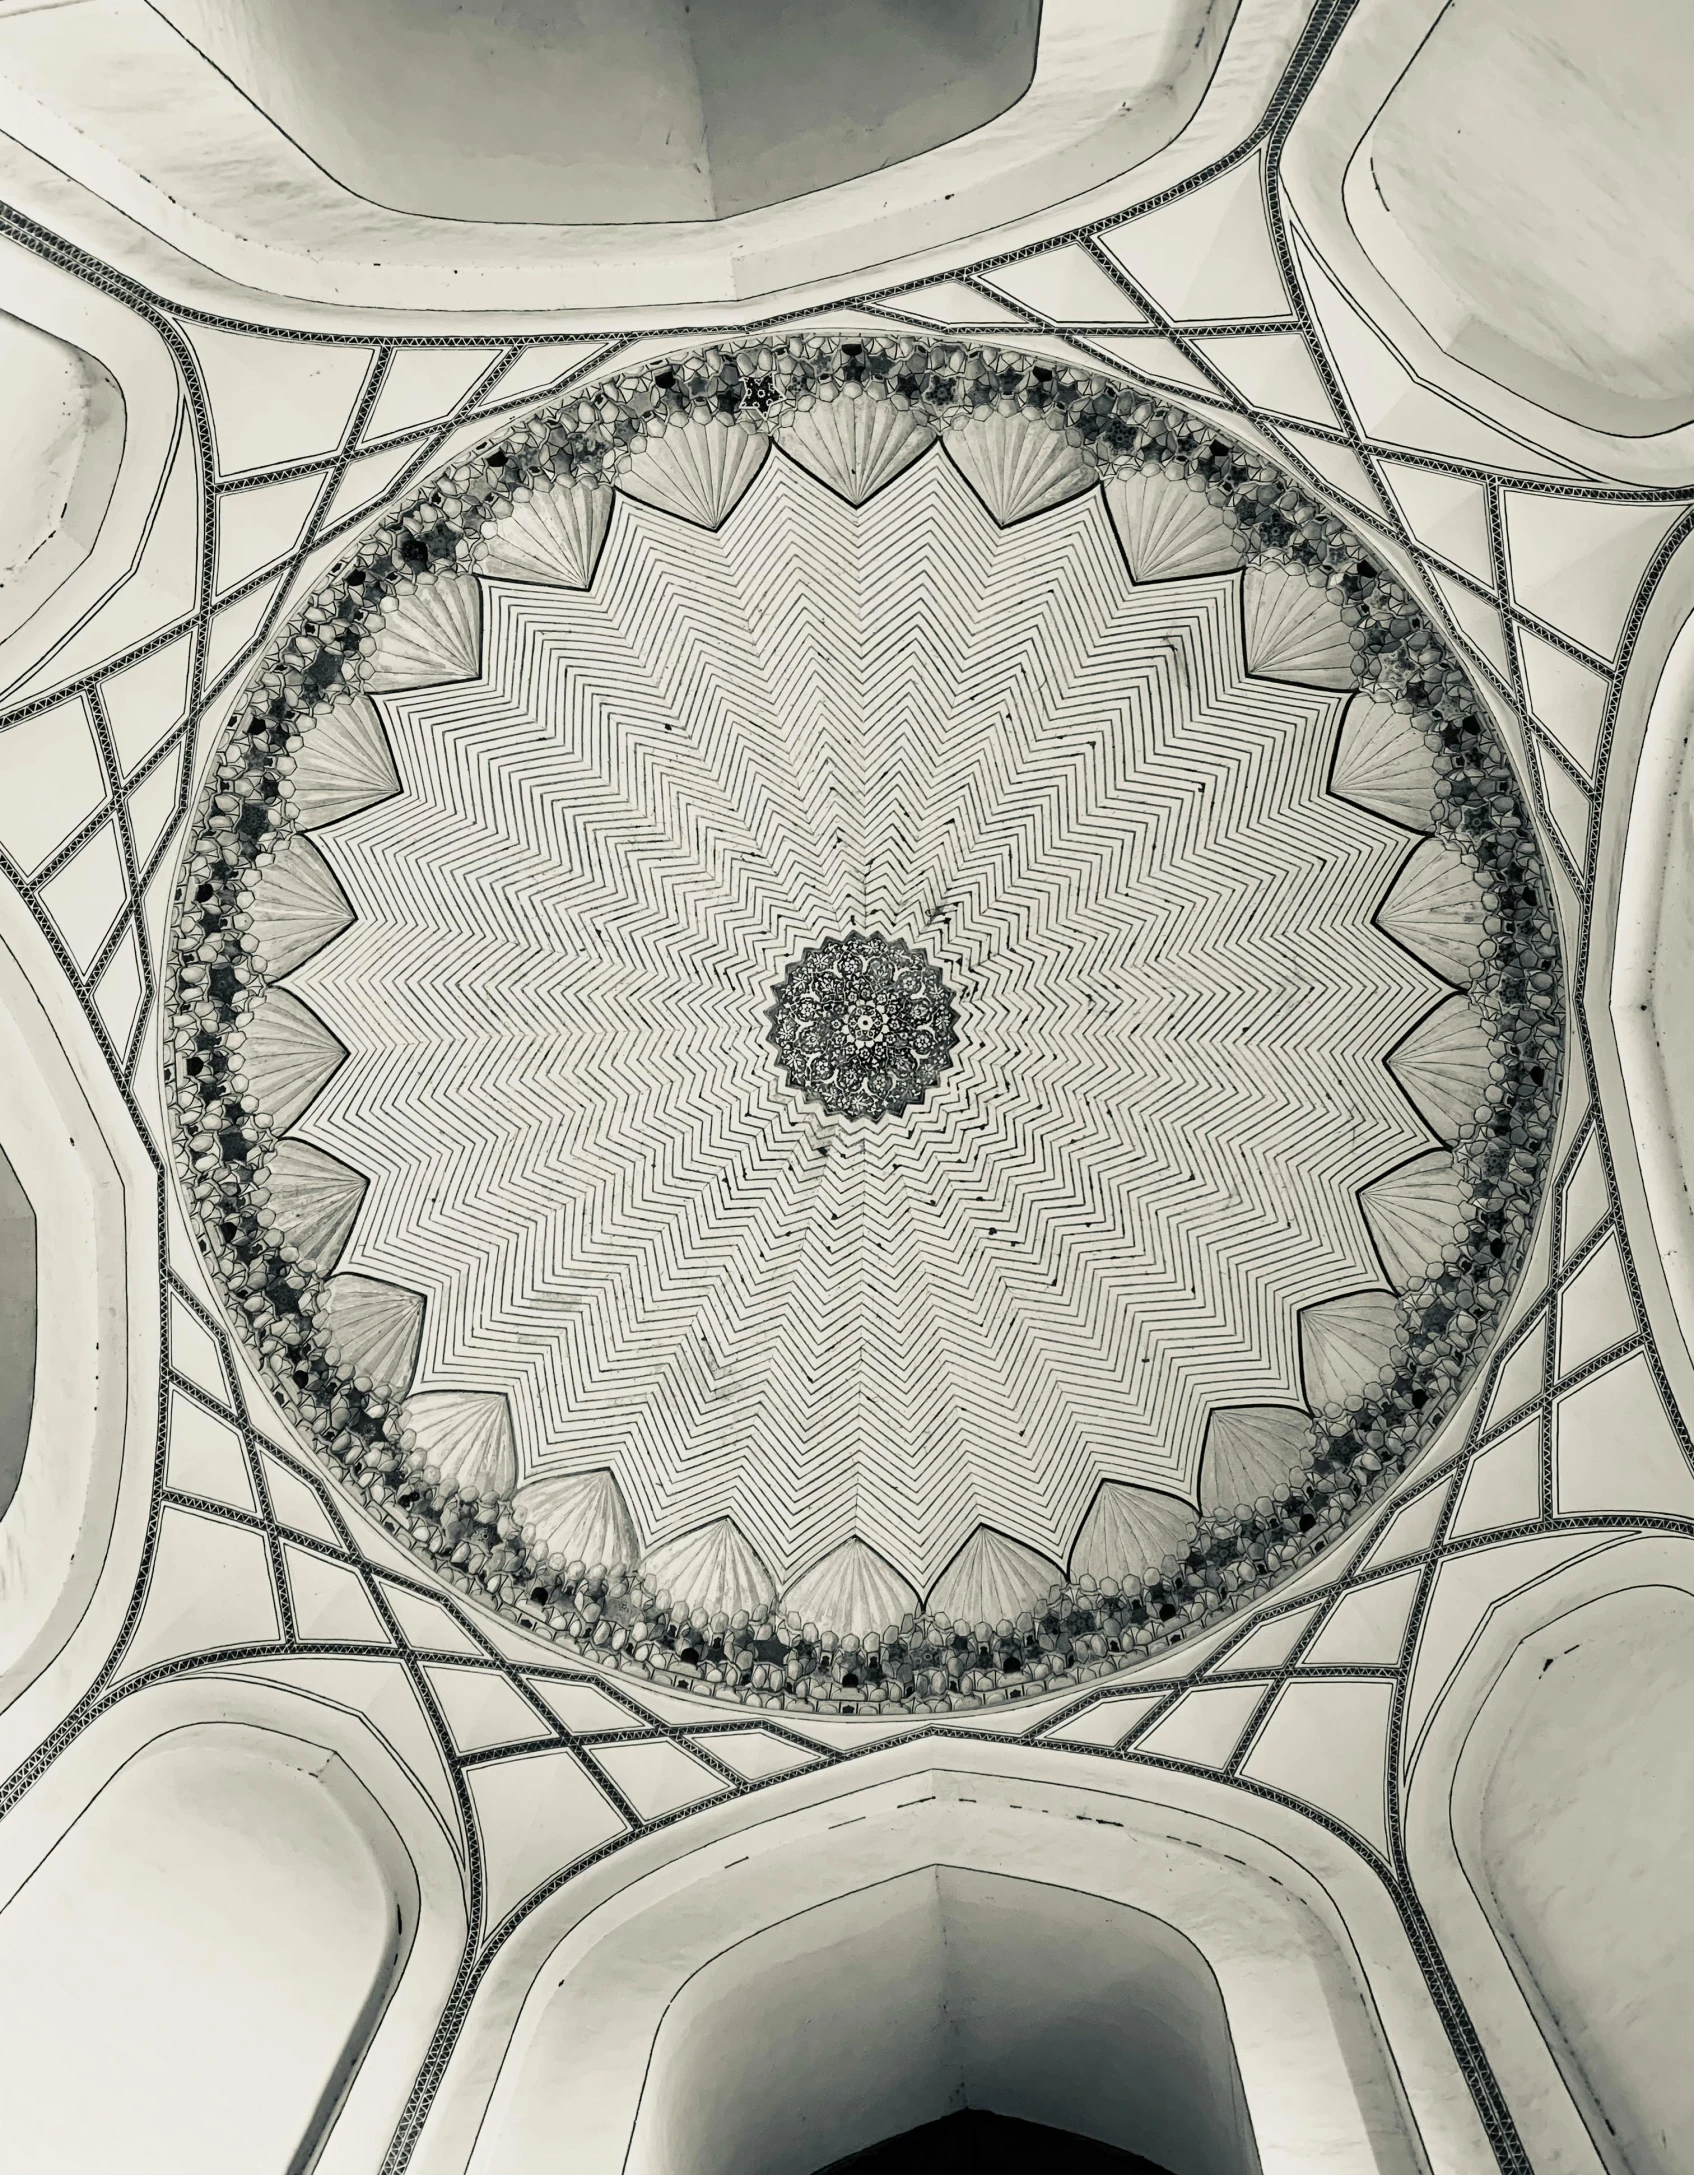 the ceiling of an ancient building with designs and a circular design